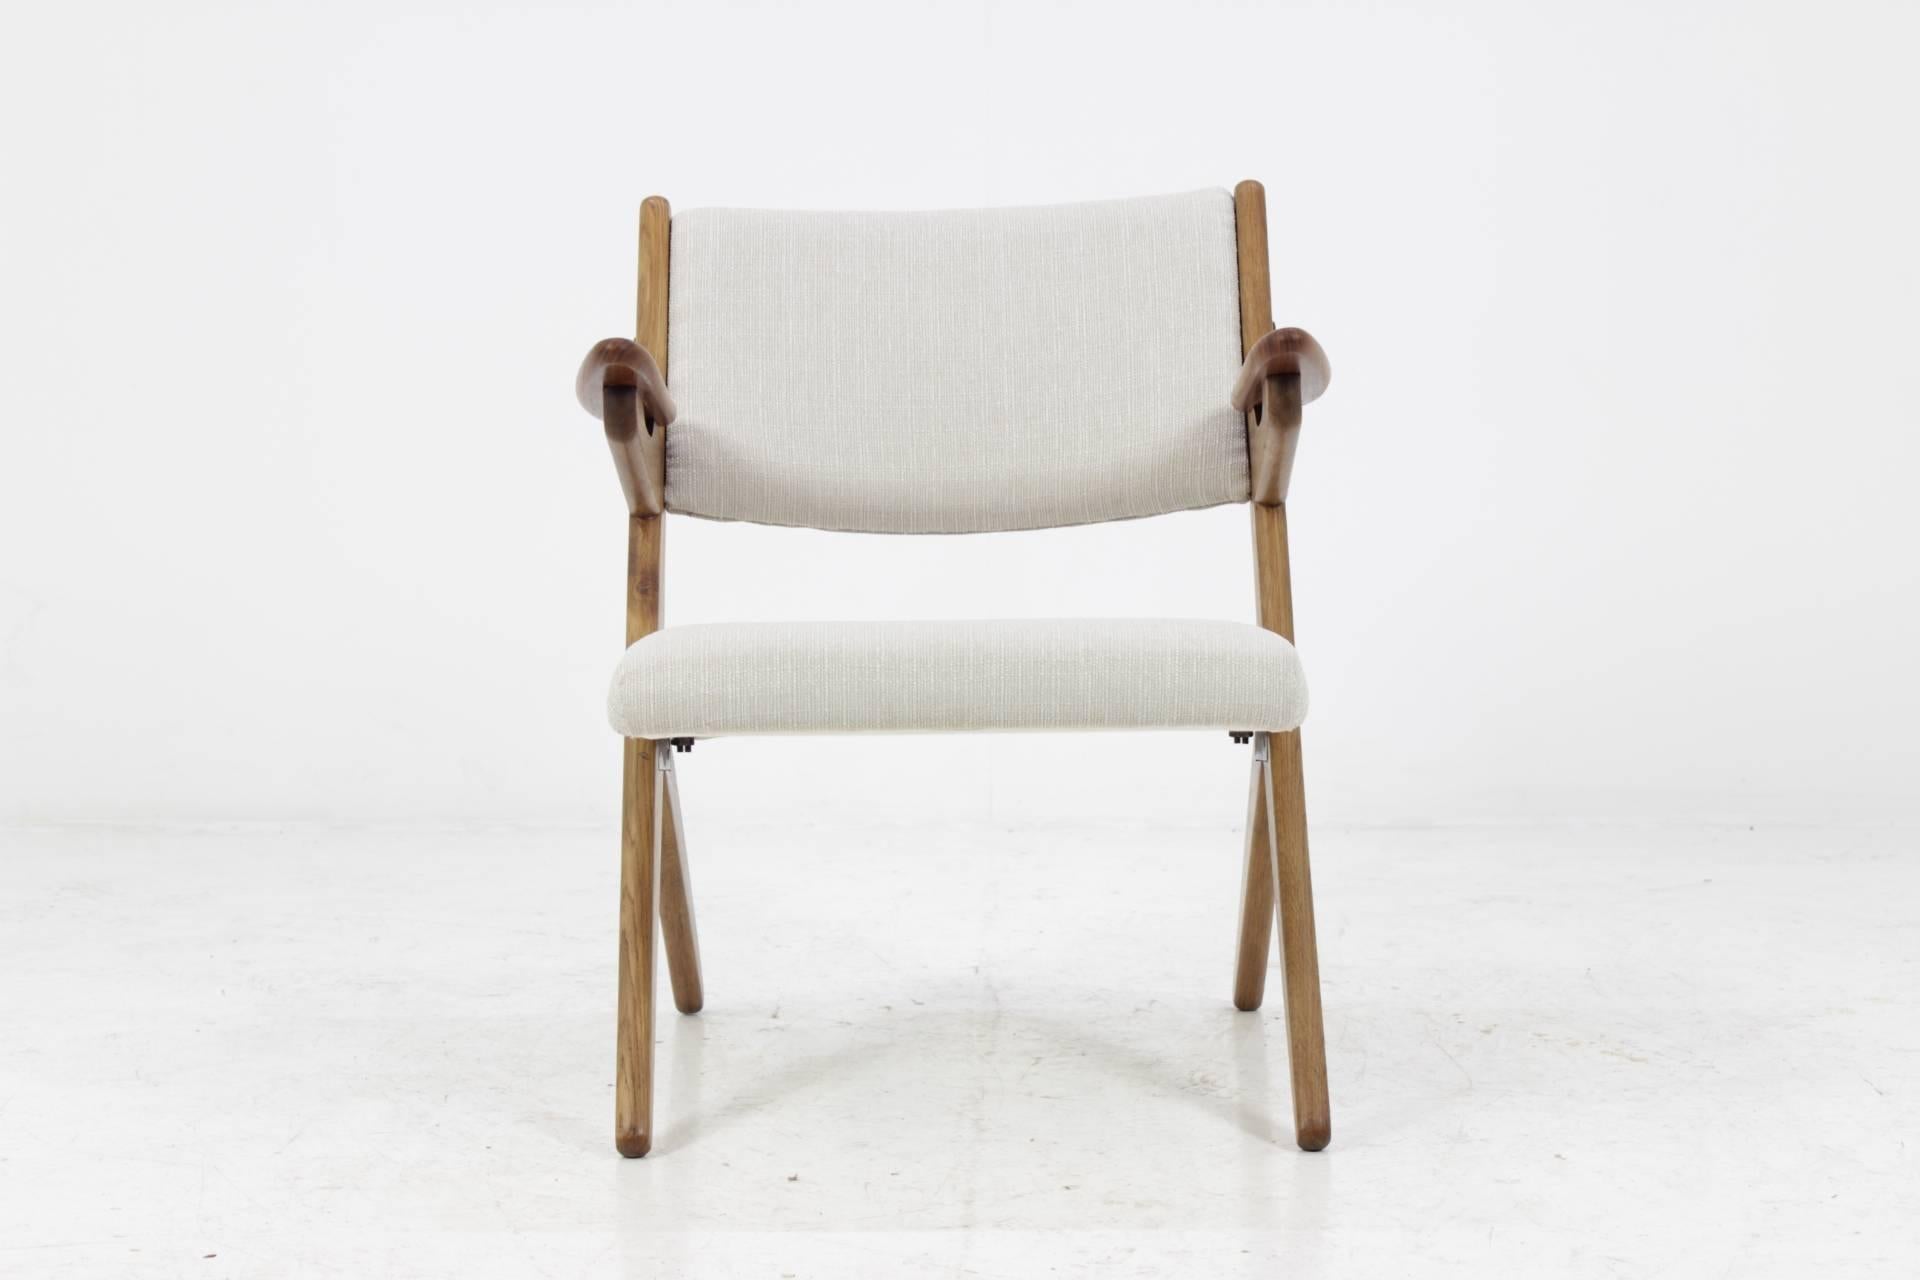 The chair features wooden oak frame and new fabric upholstery. Very good condition.